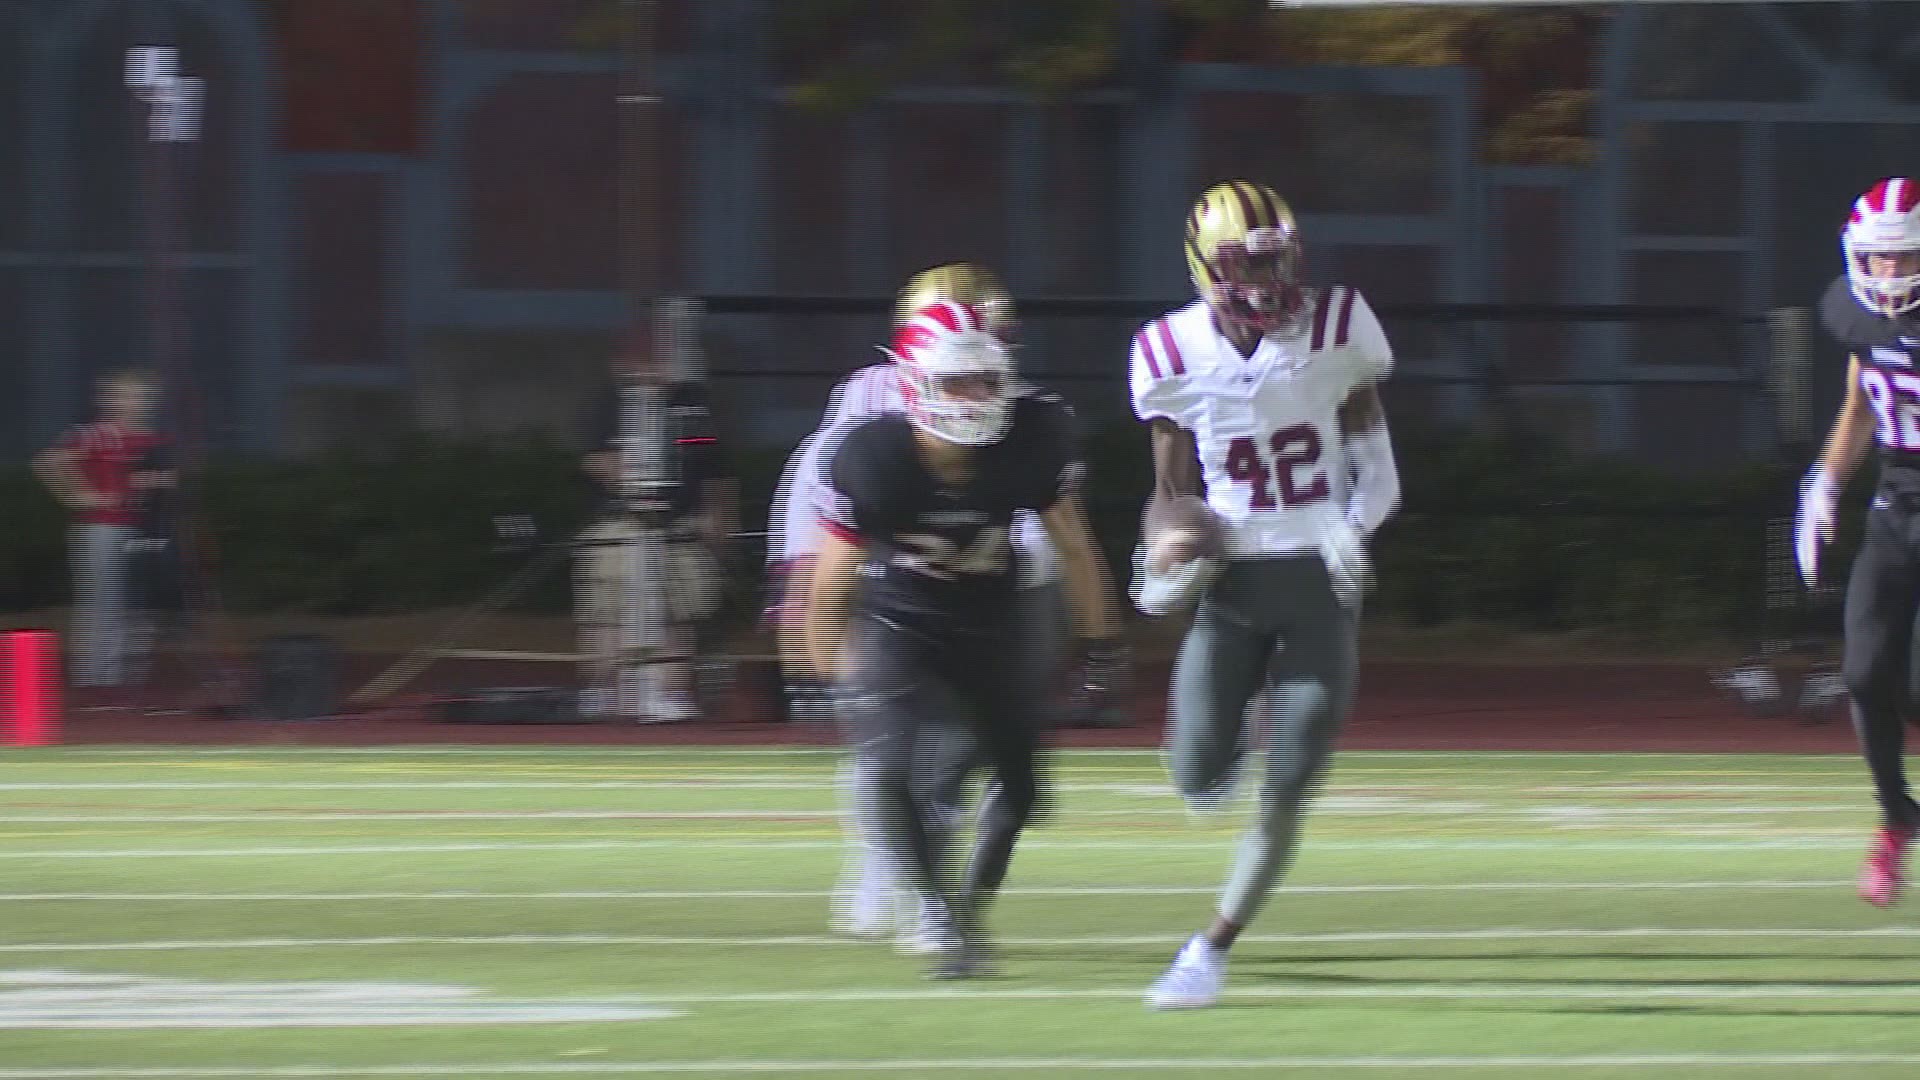 Highlights of the Southridge Skyhawks' 2018 season in Oregon. The Skyhawks finished with a 4-6 record. All highlights aired on KGW's Friday Night Flights #KGWPreps